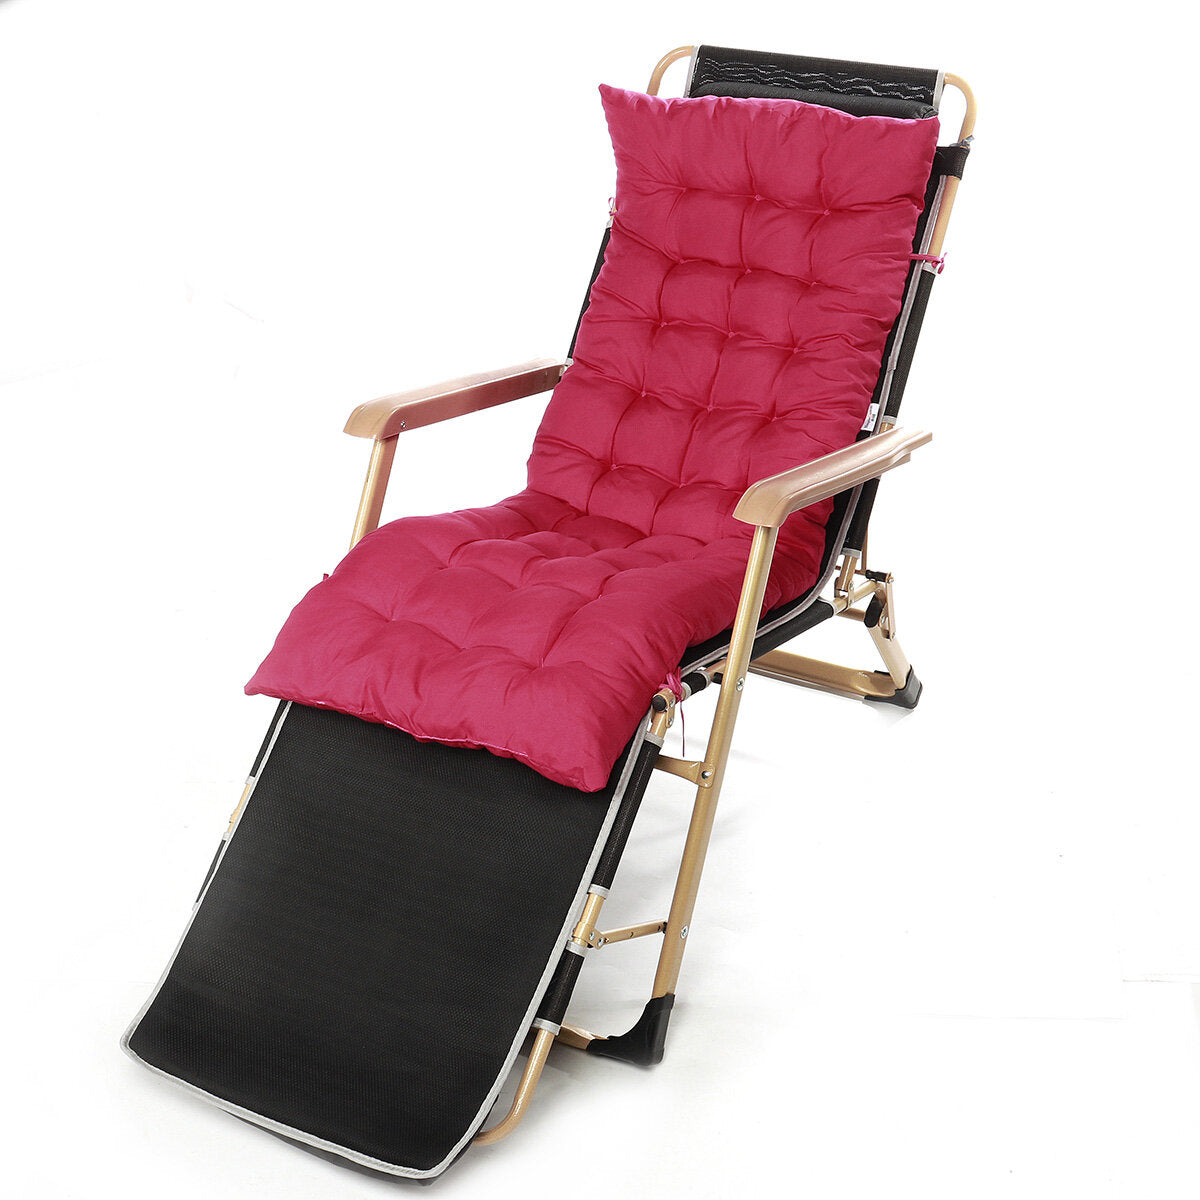 50 Inch Lounge Bench Cushion Indoor Outdoor Chaise Lounger Cushions Rocking High Back Chair Cushion for Home Office Sofa